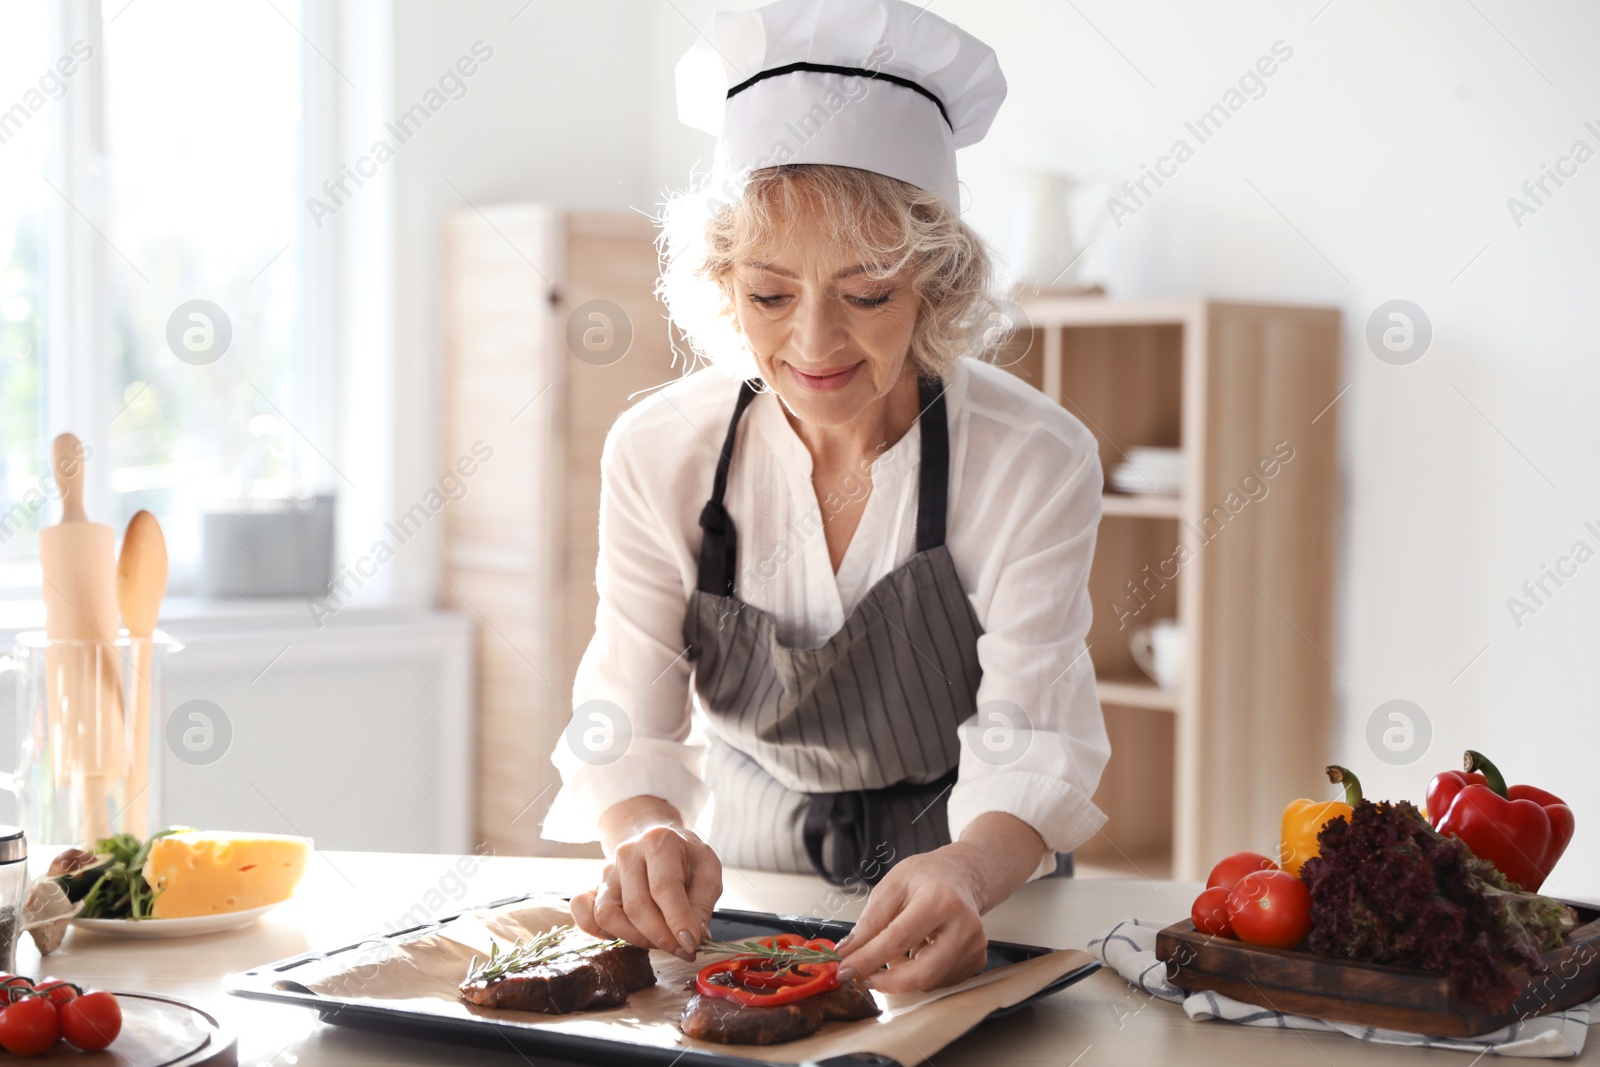 Photo of Professional female chef preparing meat on table in kitchen